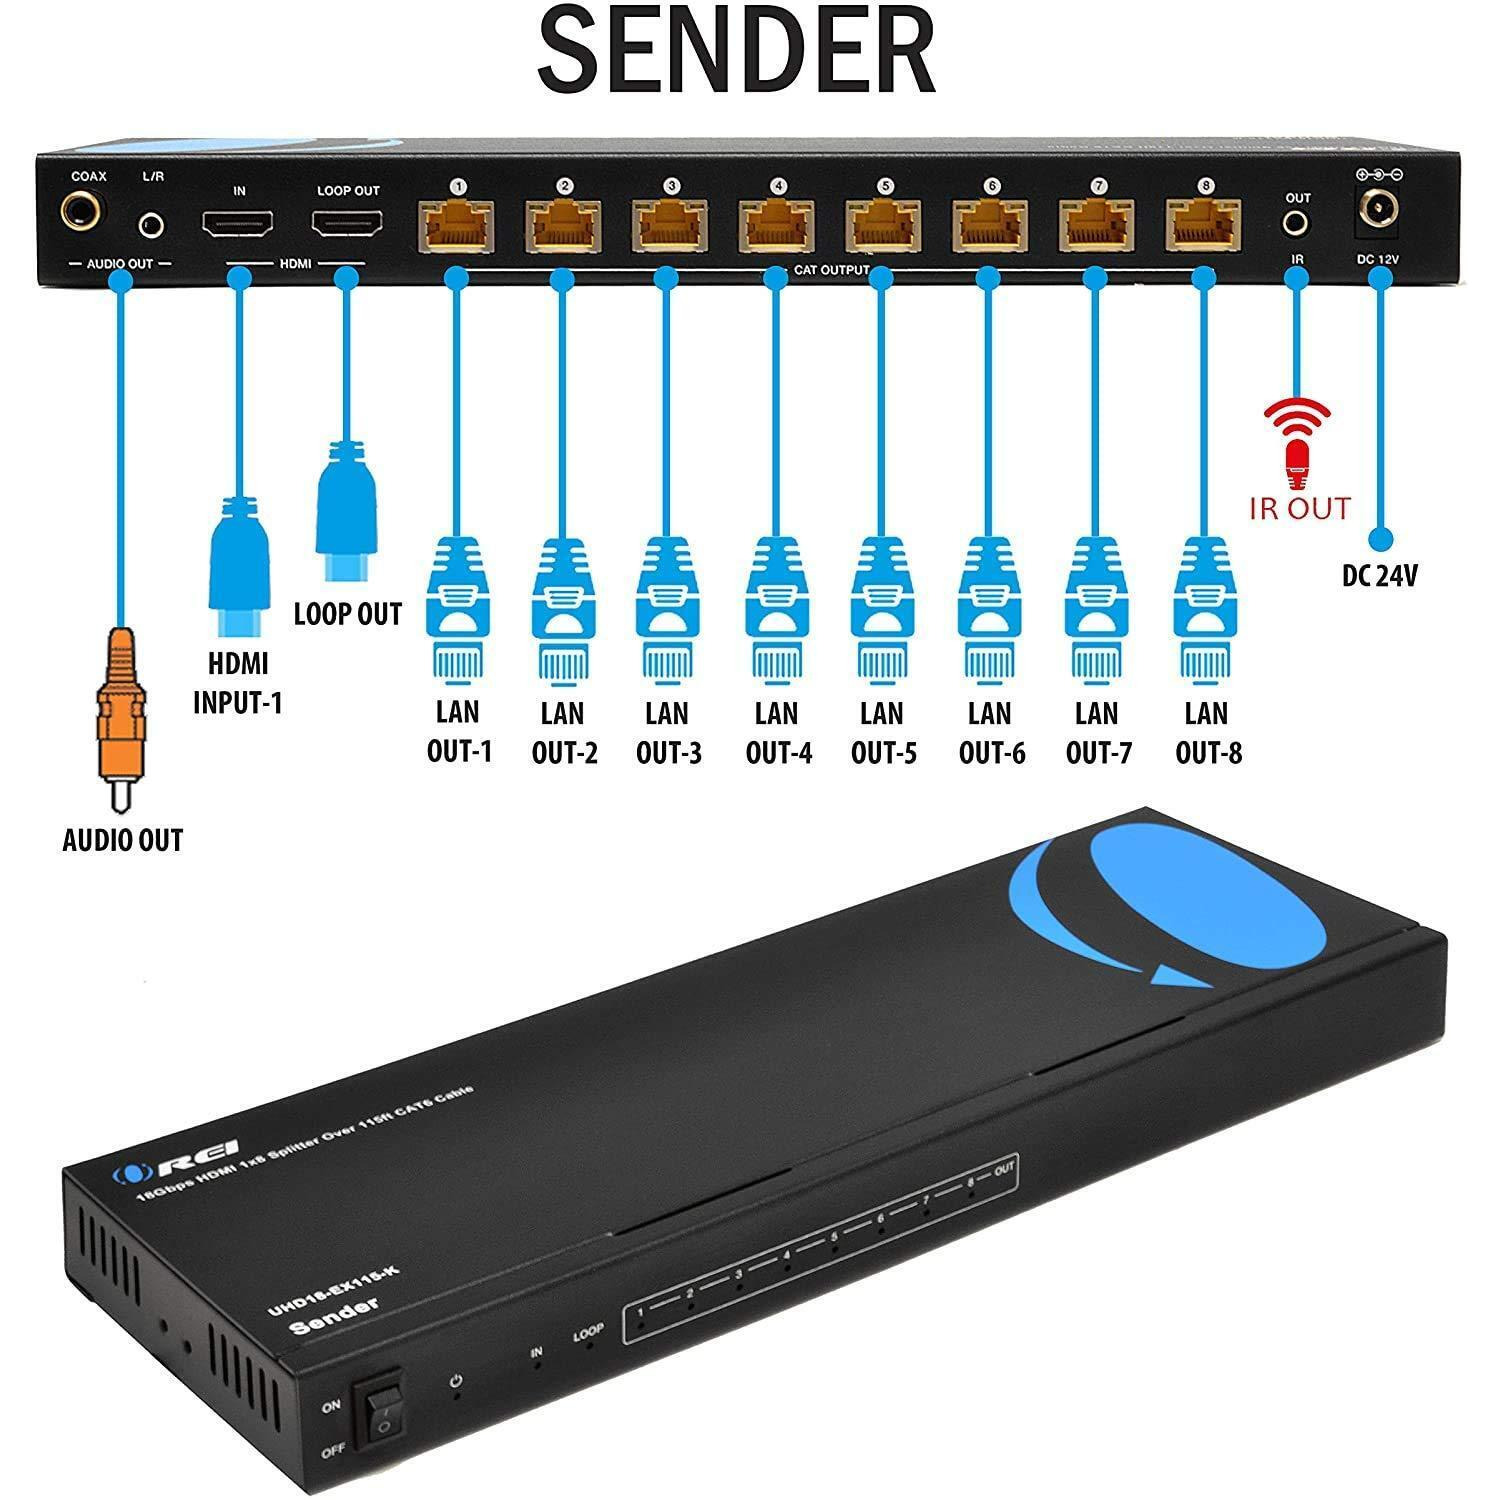 1x8 HDMI Extender Splitter 4K by OREI Multiple Over Single Cable CAT6/7 4K@60Hz 4:4:4 HDCP 2.2 With IR Remote EDID Management - Up to 115 Ft - Loop Out - Low Latency - Full Support alternate image